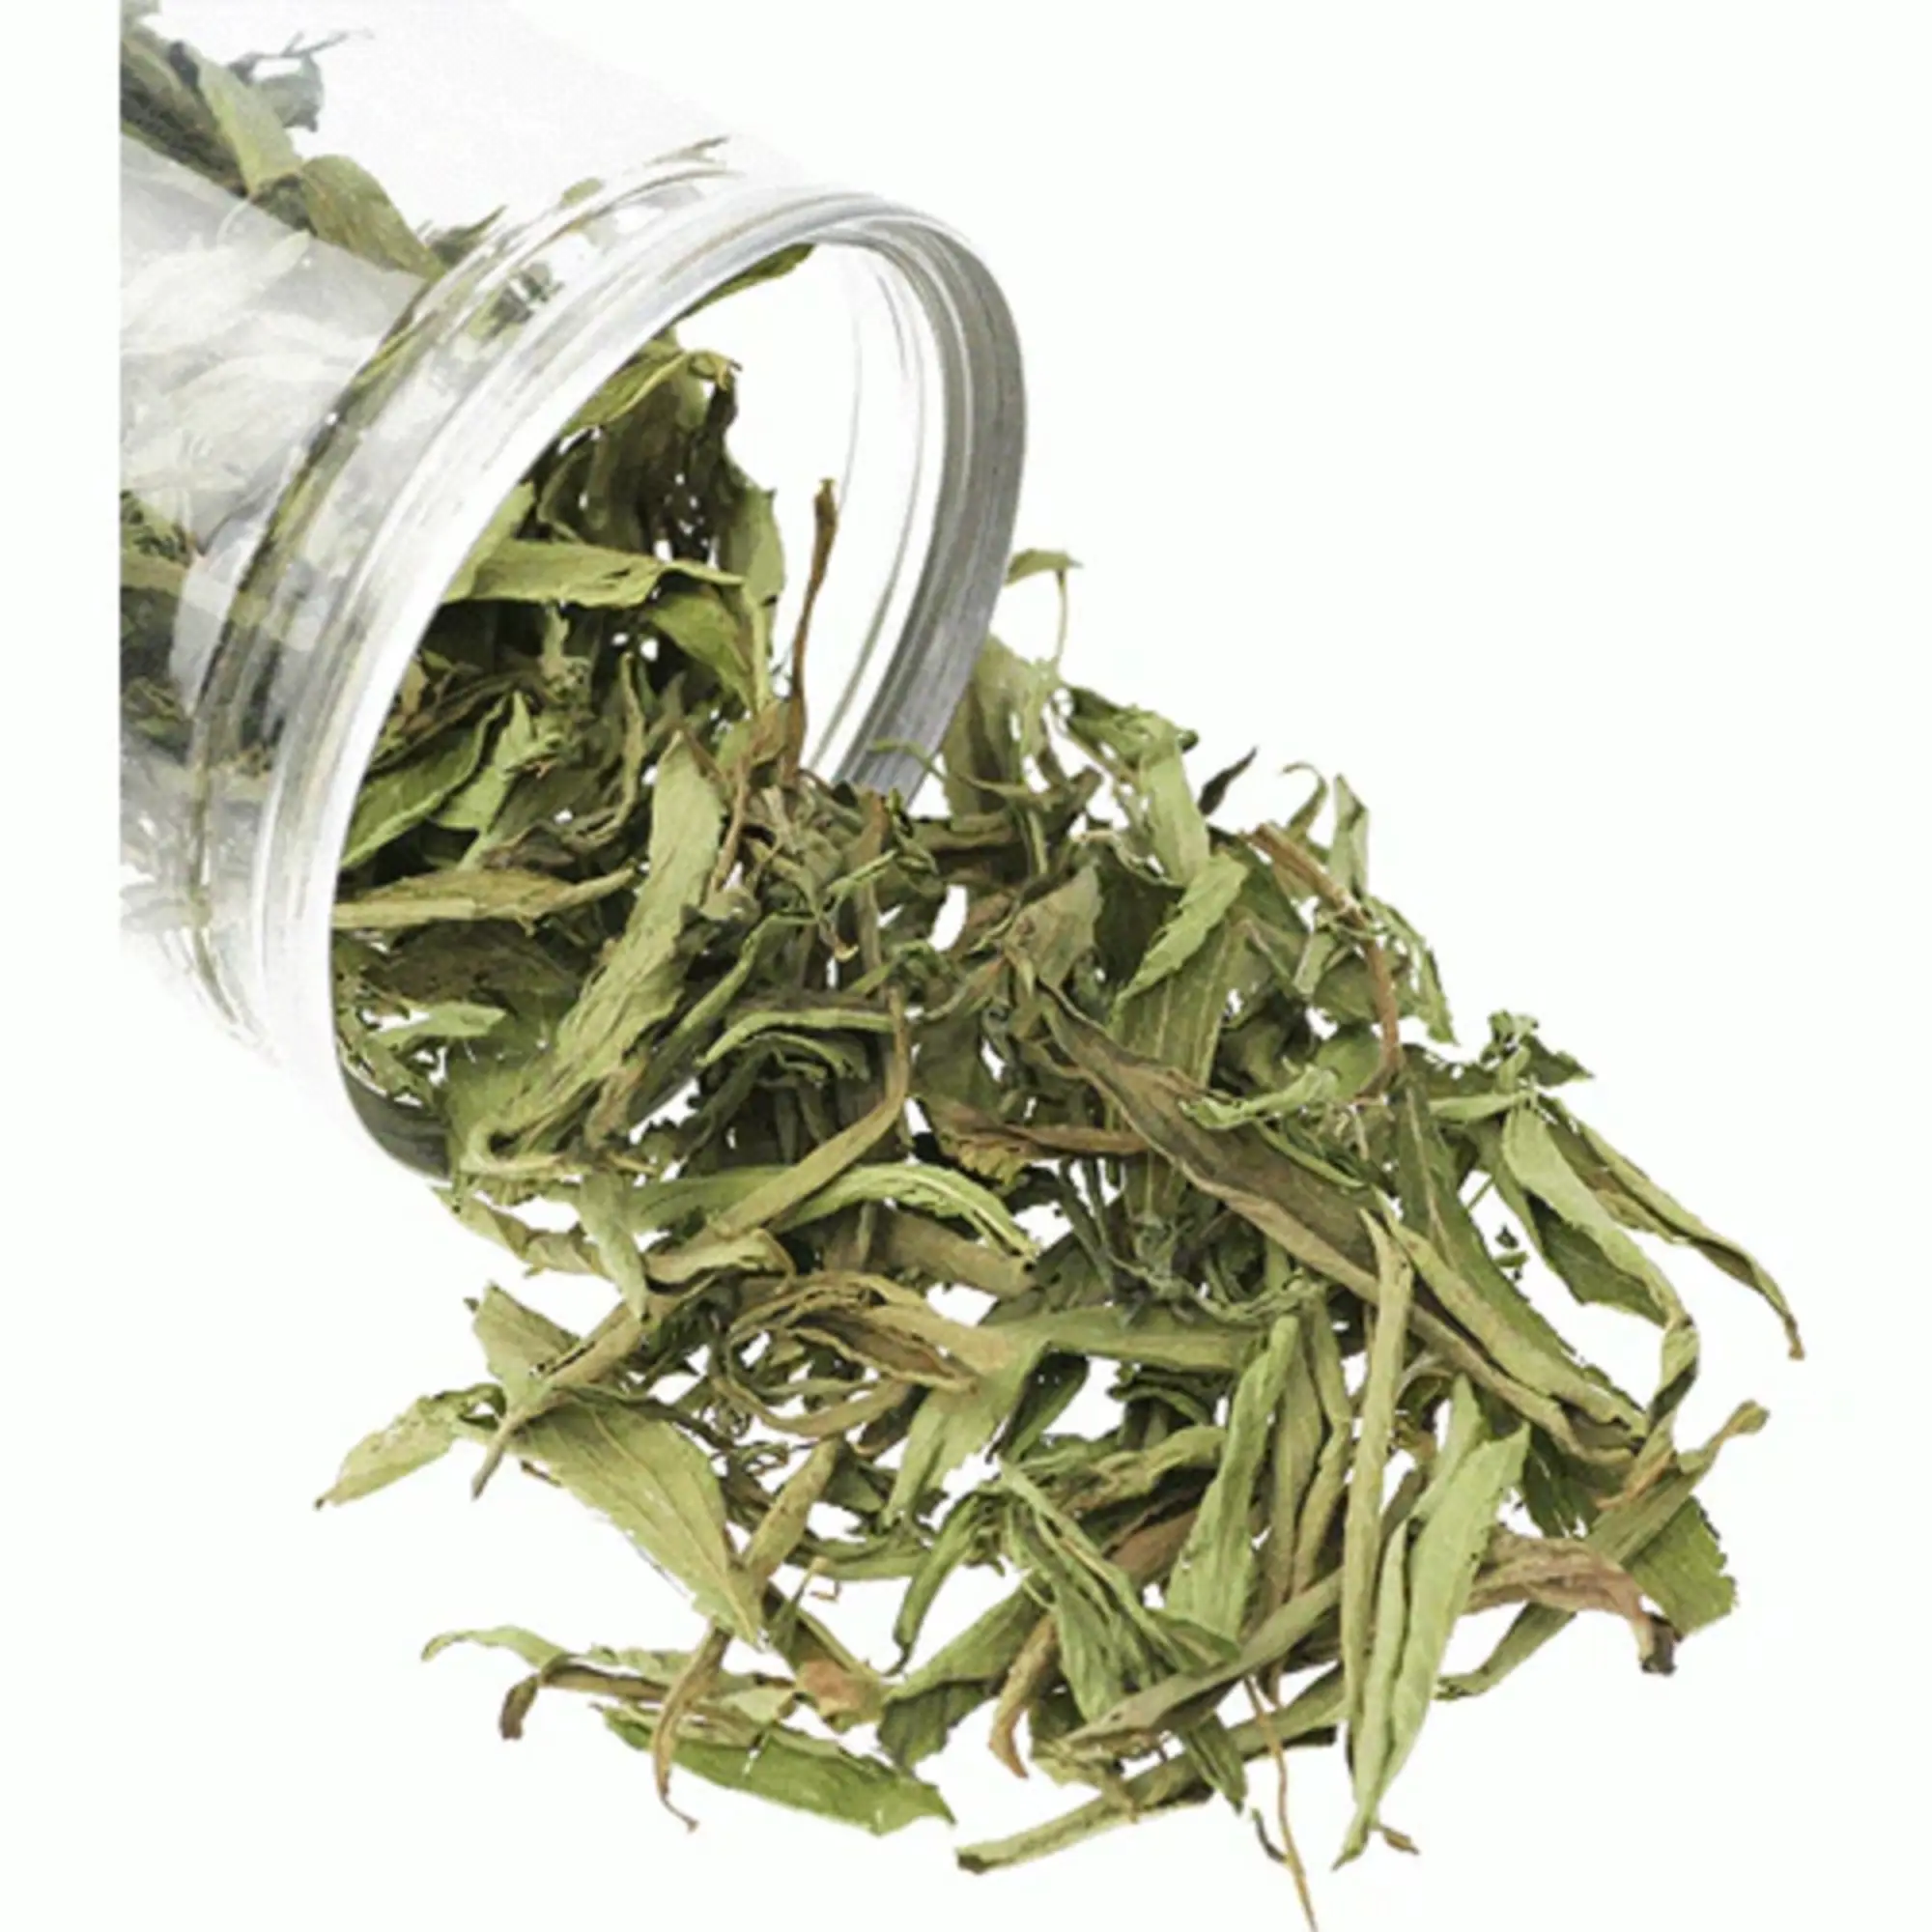 Wholesale China Stevia Leaf In Bulk Dried Stevia Leaves Stevia Natural Dry Leaf Herb Tea Available For Wholesale And Export